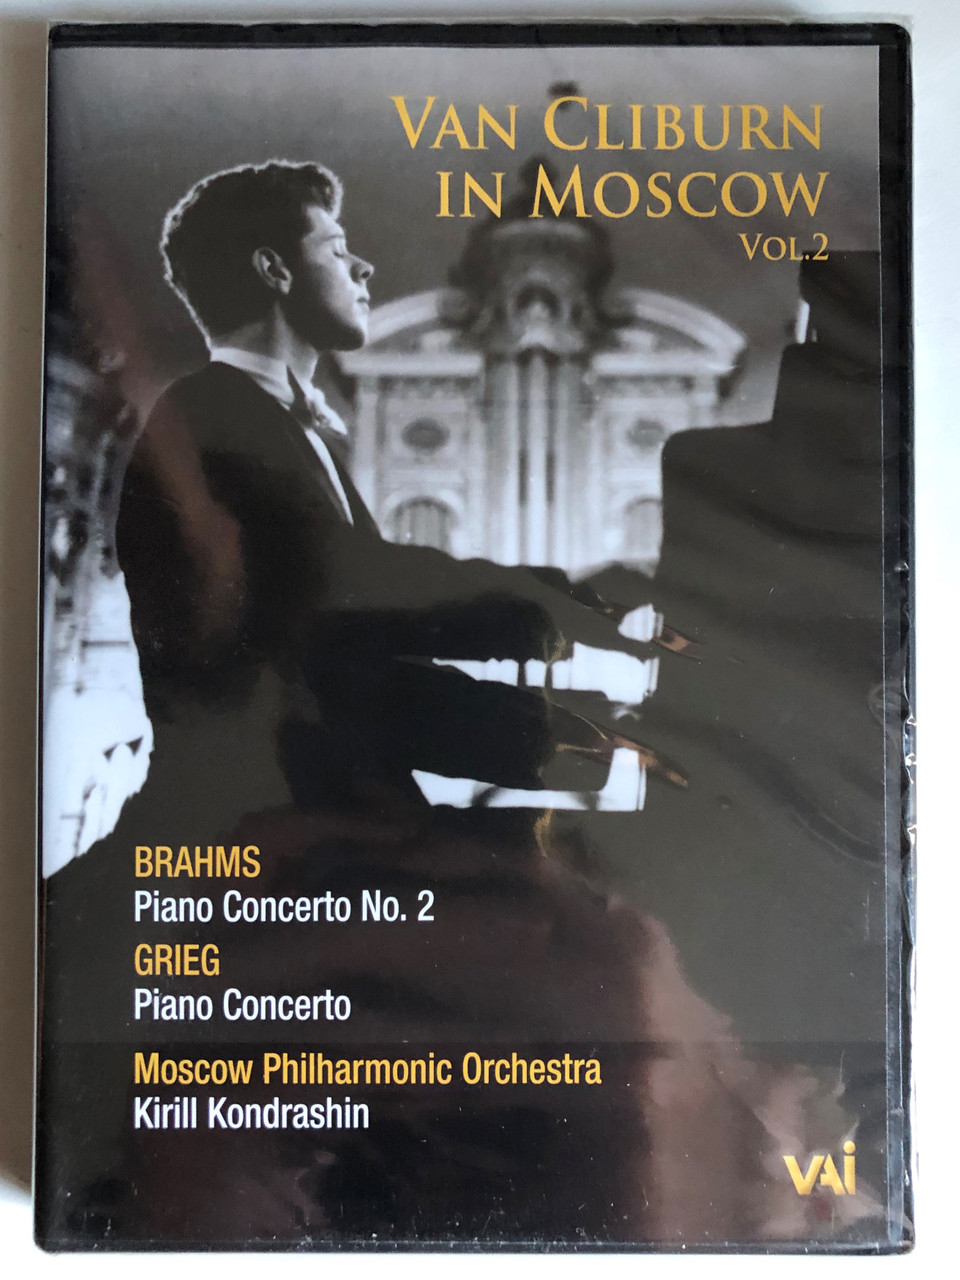 Van_Cliburn_in_Moscow_Vol._2_Live_performance_1974_Recorded_in_the_Great_Hall_of_the_Moscow_Conservatory_PACKAGING_DESIGN_AND_DVD_AUTHORING_2008_VIDEO_ARTISTS_INTERNATION__52768.1691927113.1280.1280.JPG (960×1280)